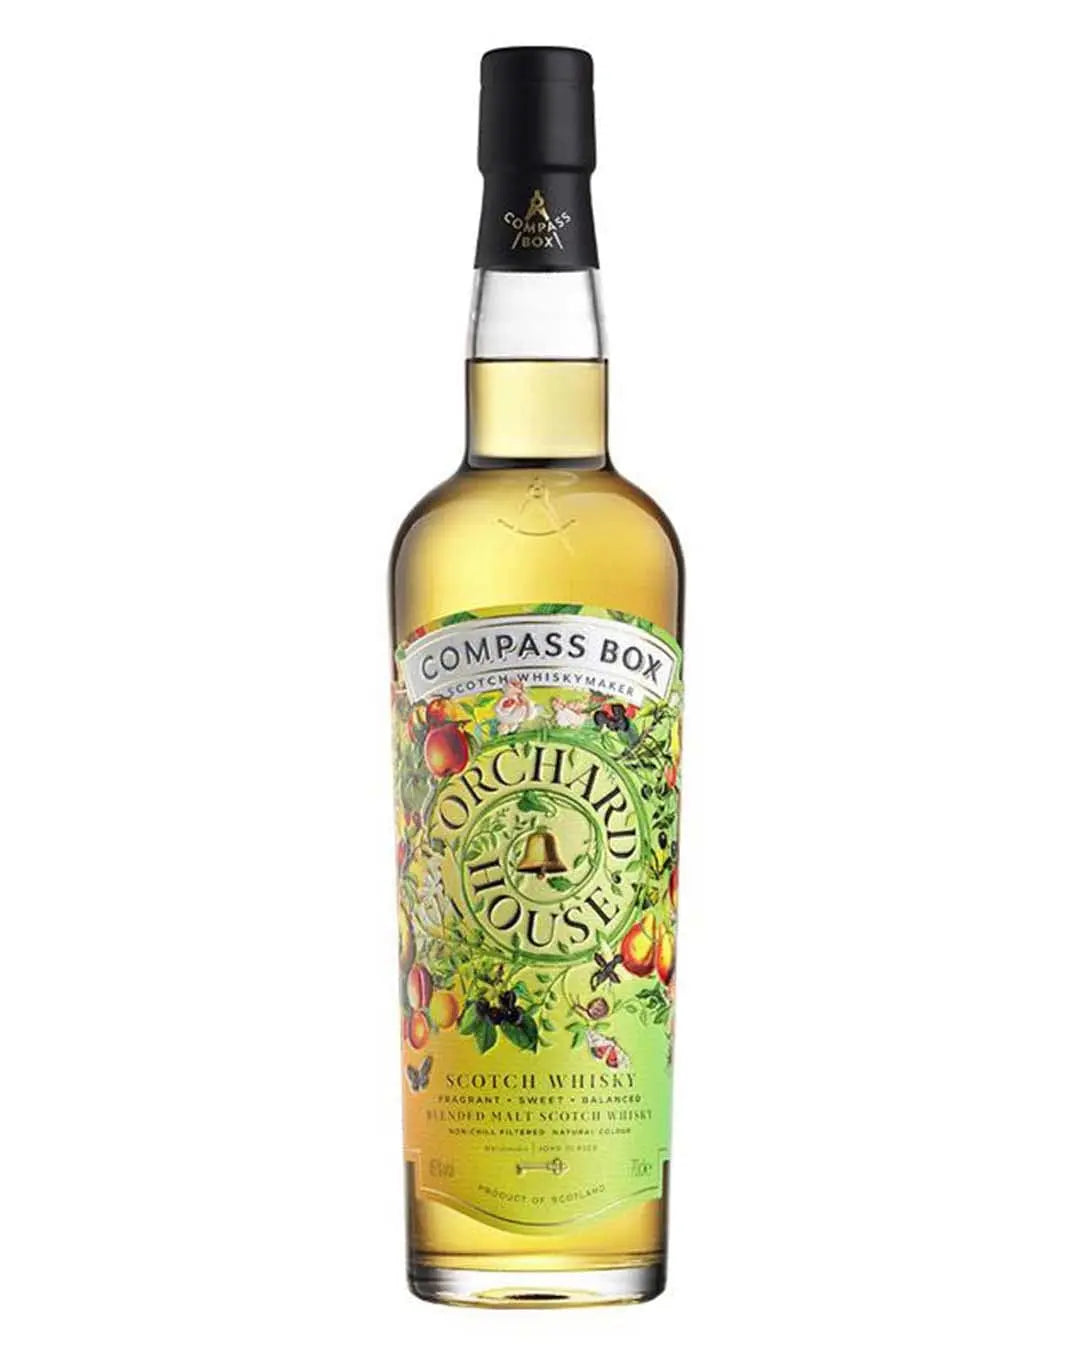 Compass Box Orchard House Whisky, 70 cl Whisky